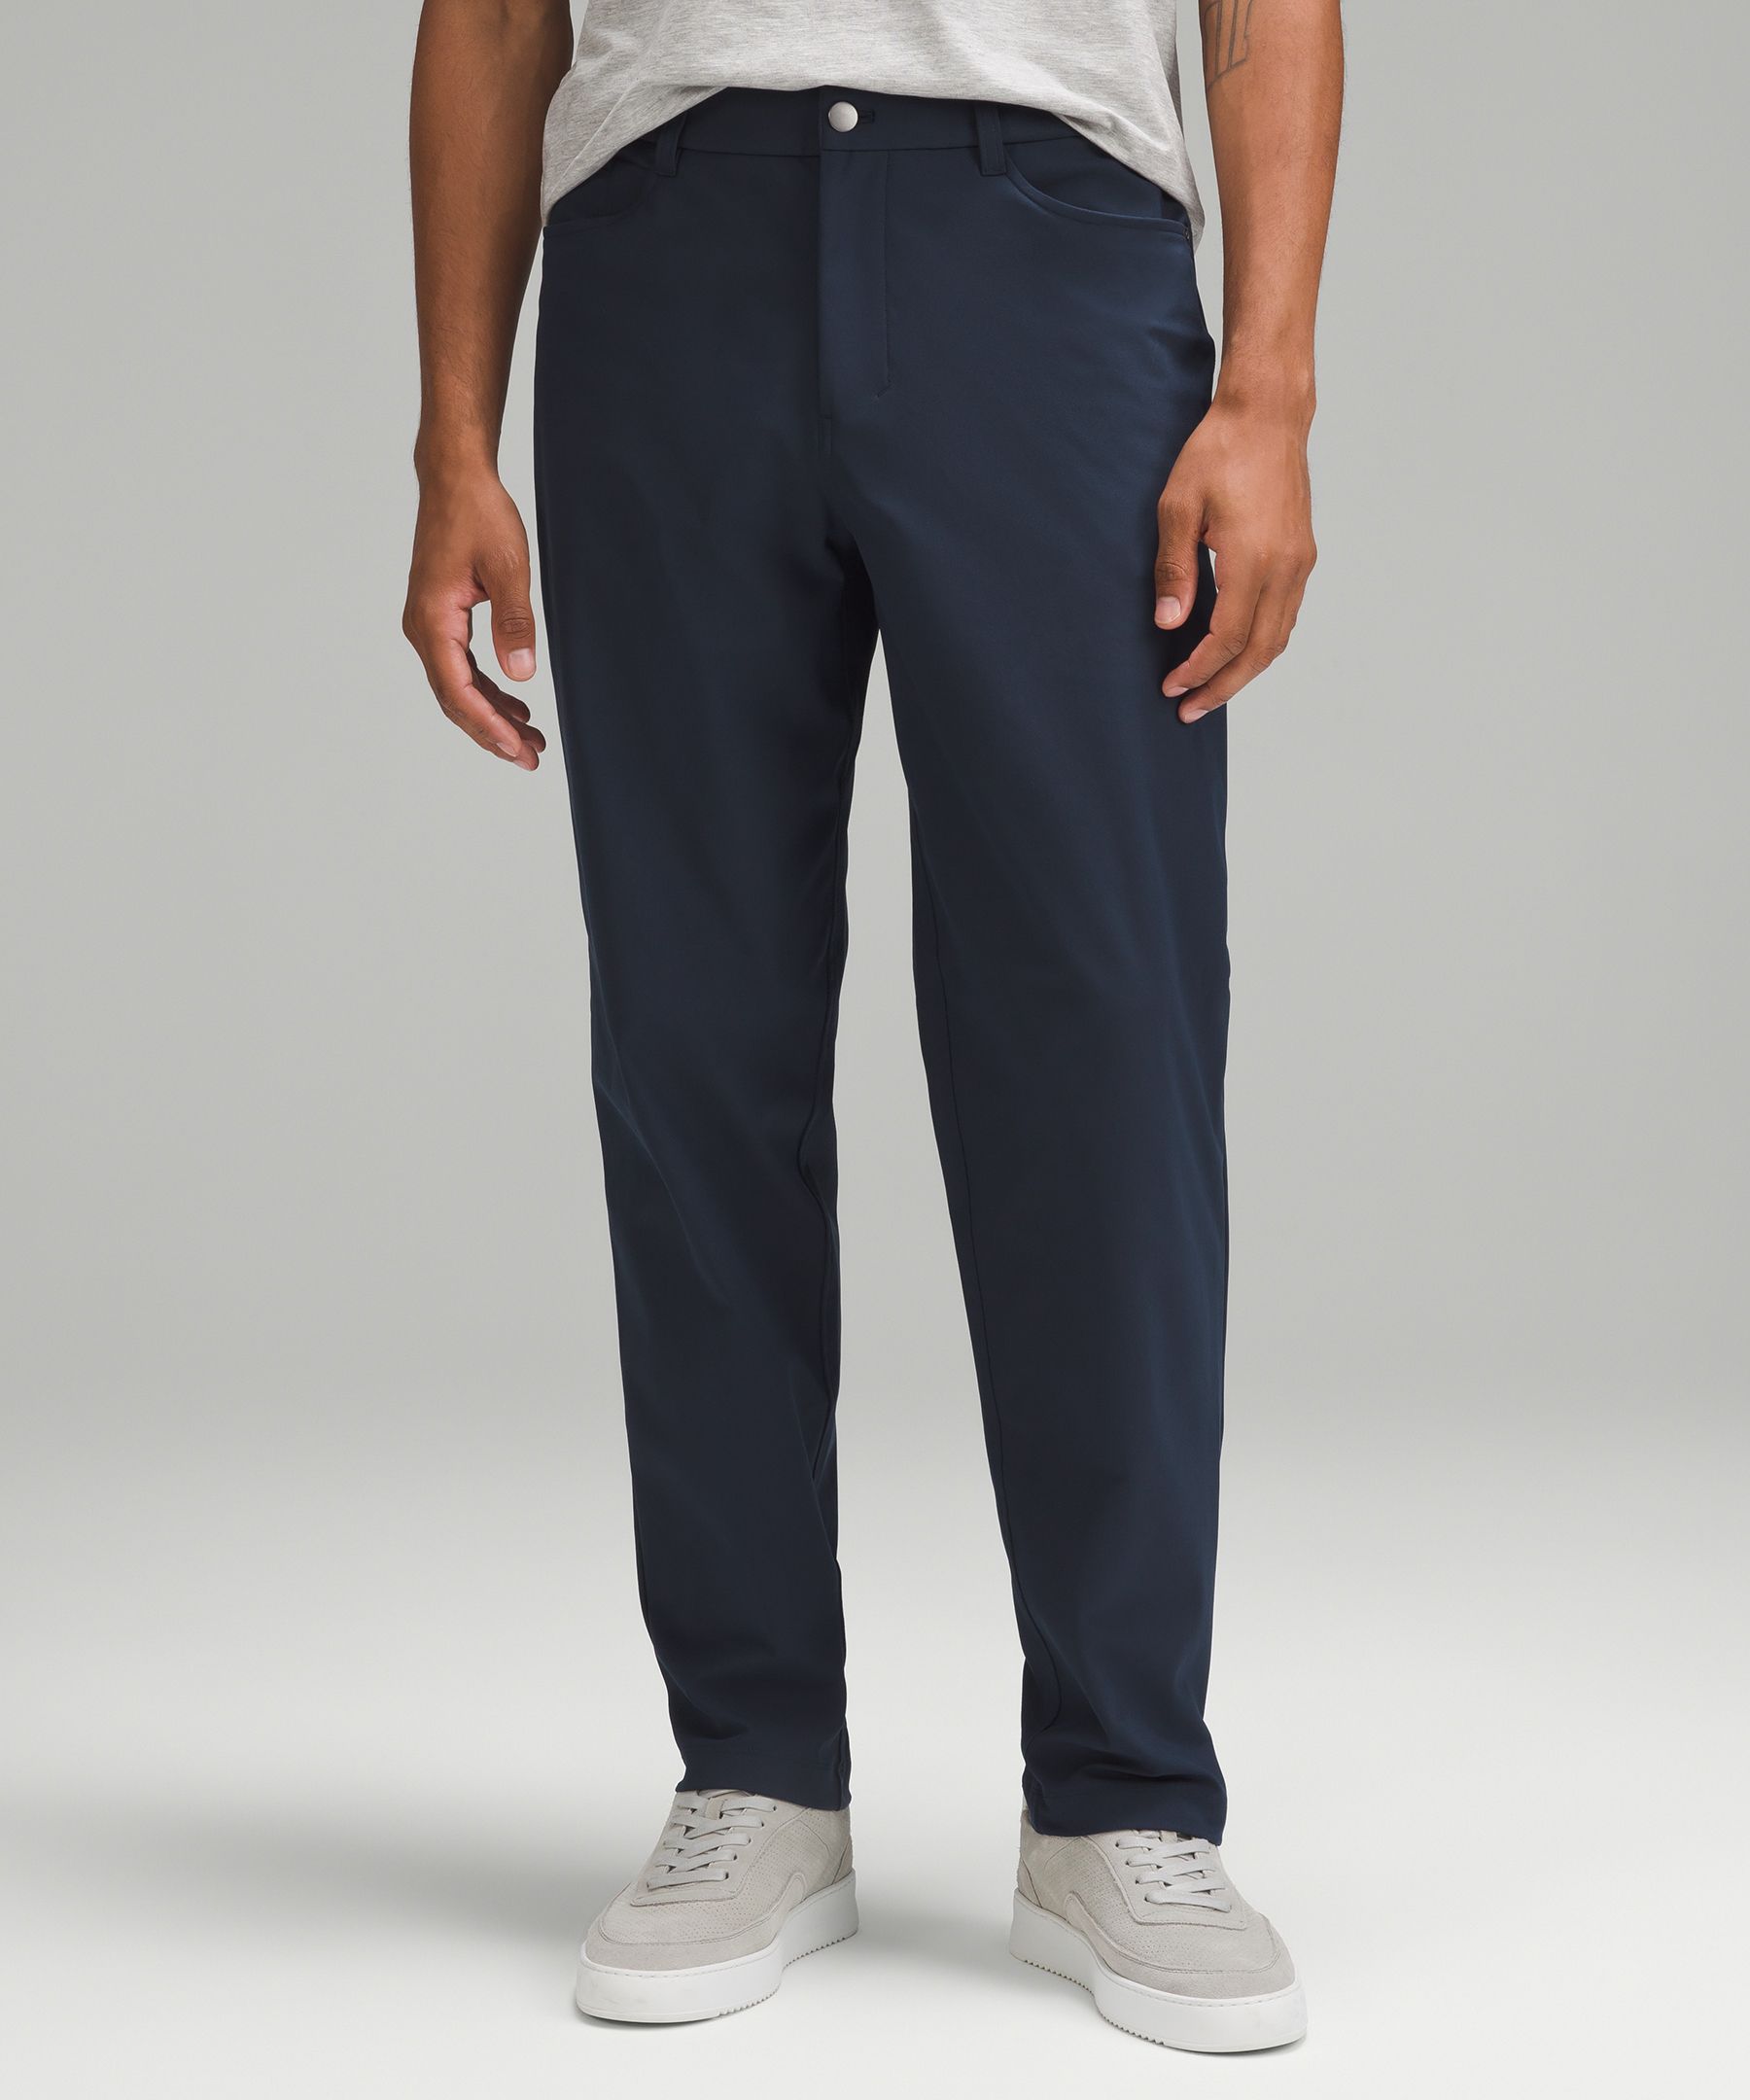 Men's ABC Trousers also known as Commission Pant